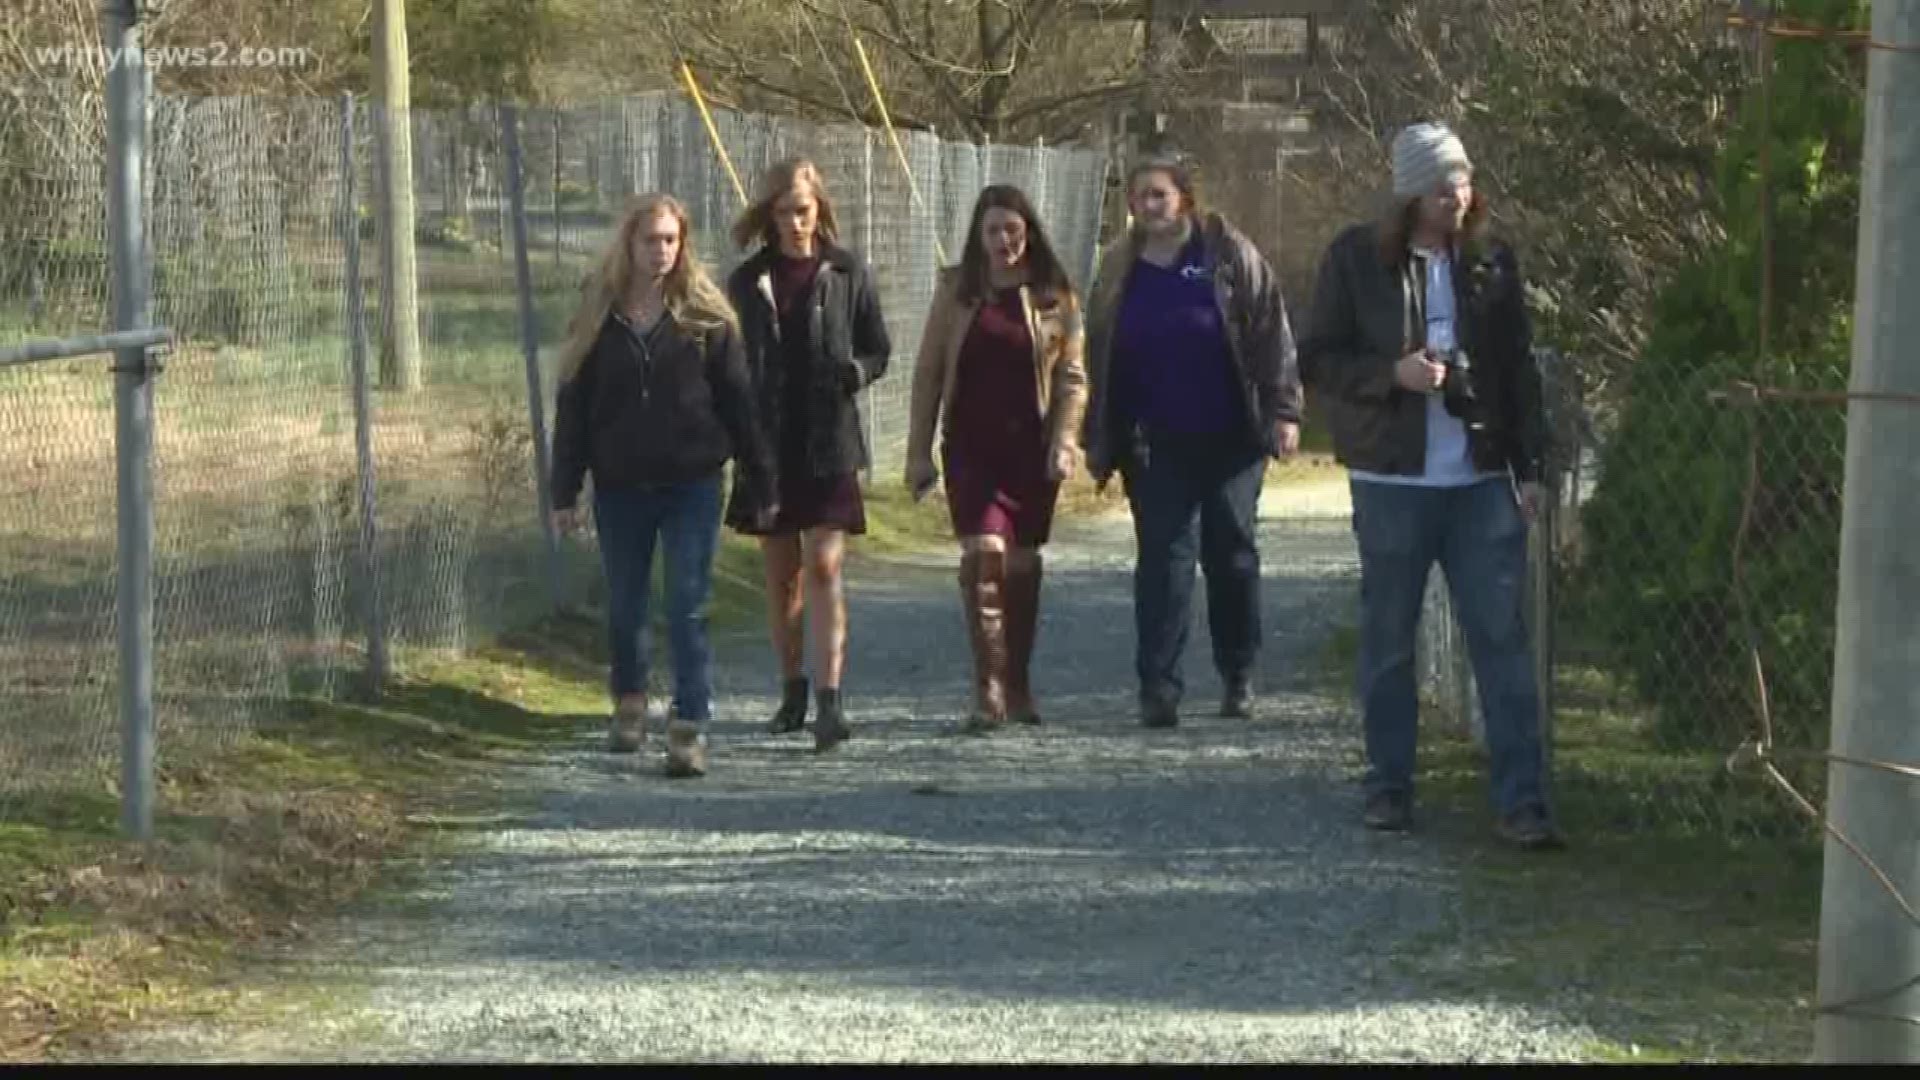 WFMY News 2 was the first television crew to go inside the Conservators Center in Caswell County since the attack that killed 22-year-old Alex Black.